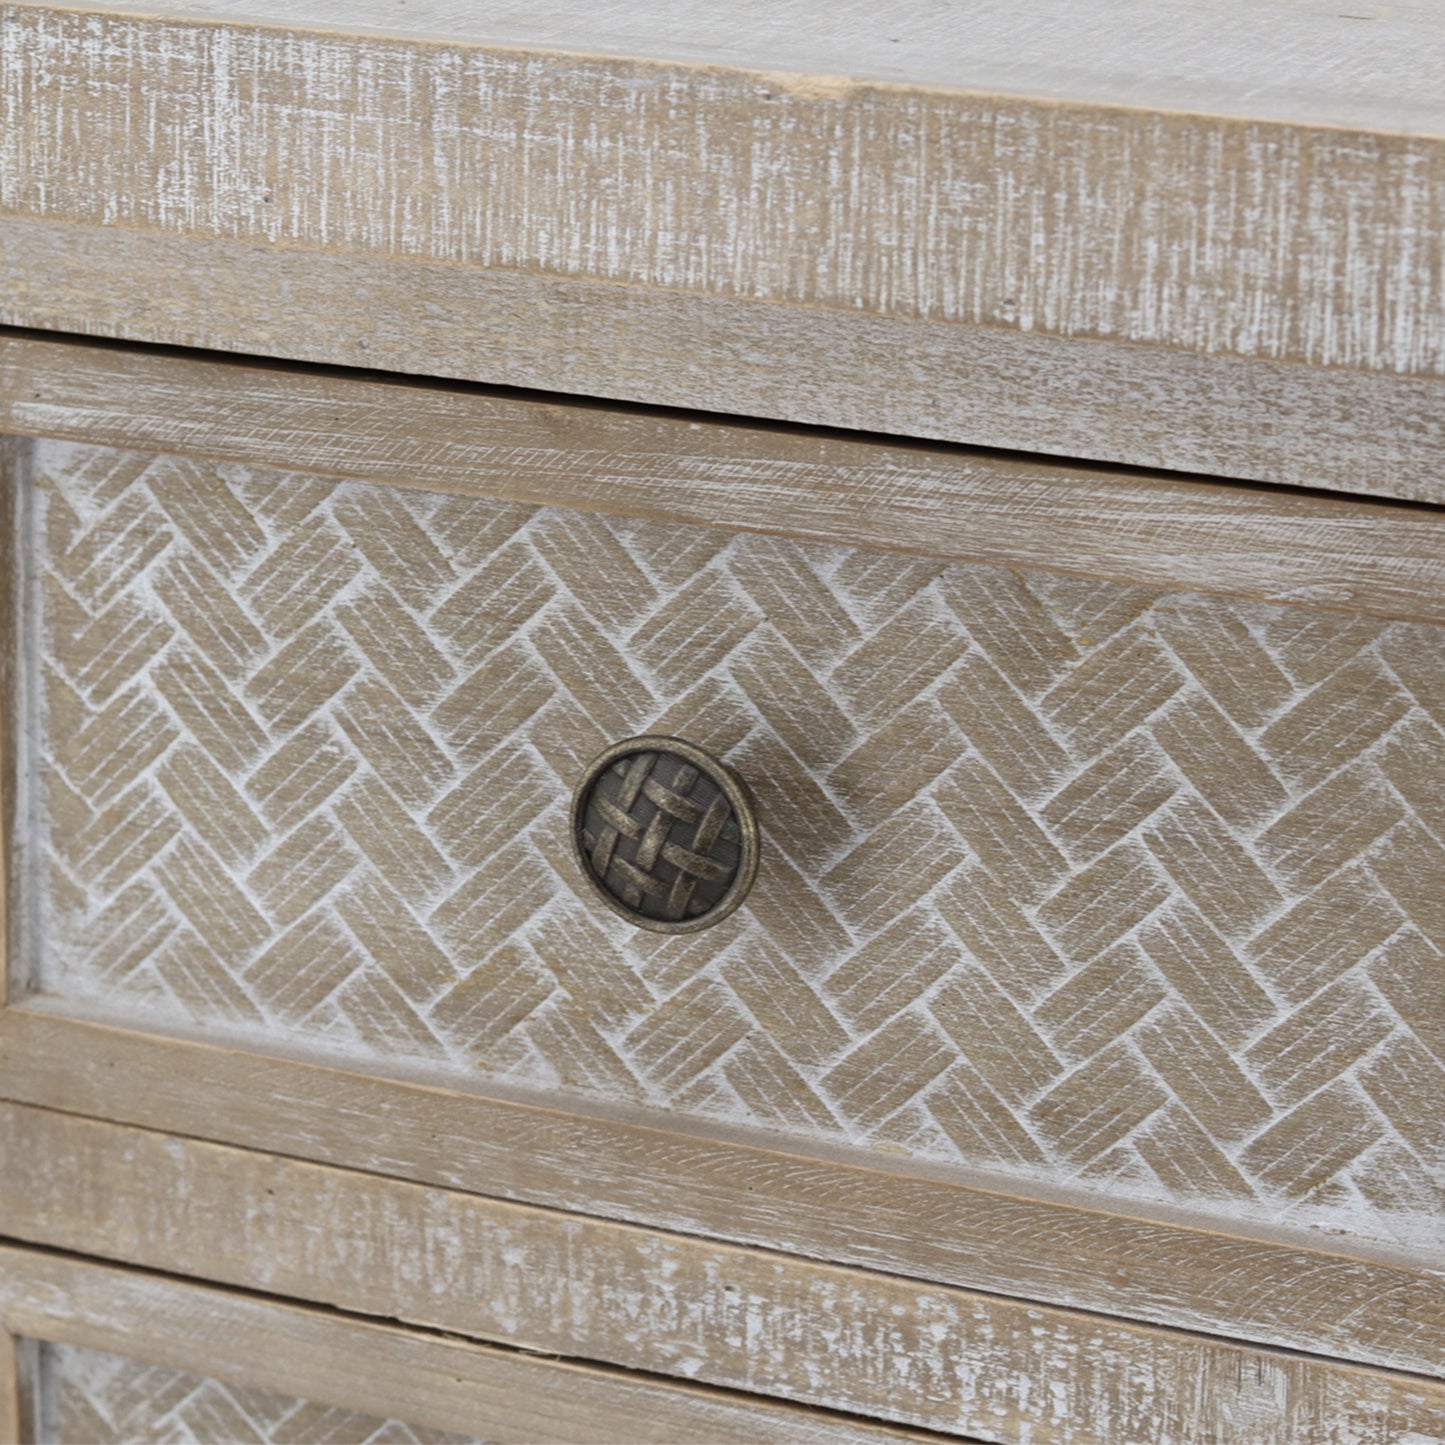 Weathered Wooden Chest 5-Drawer Floor Cabinet